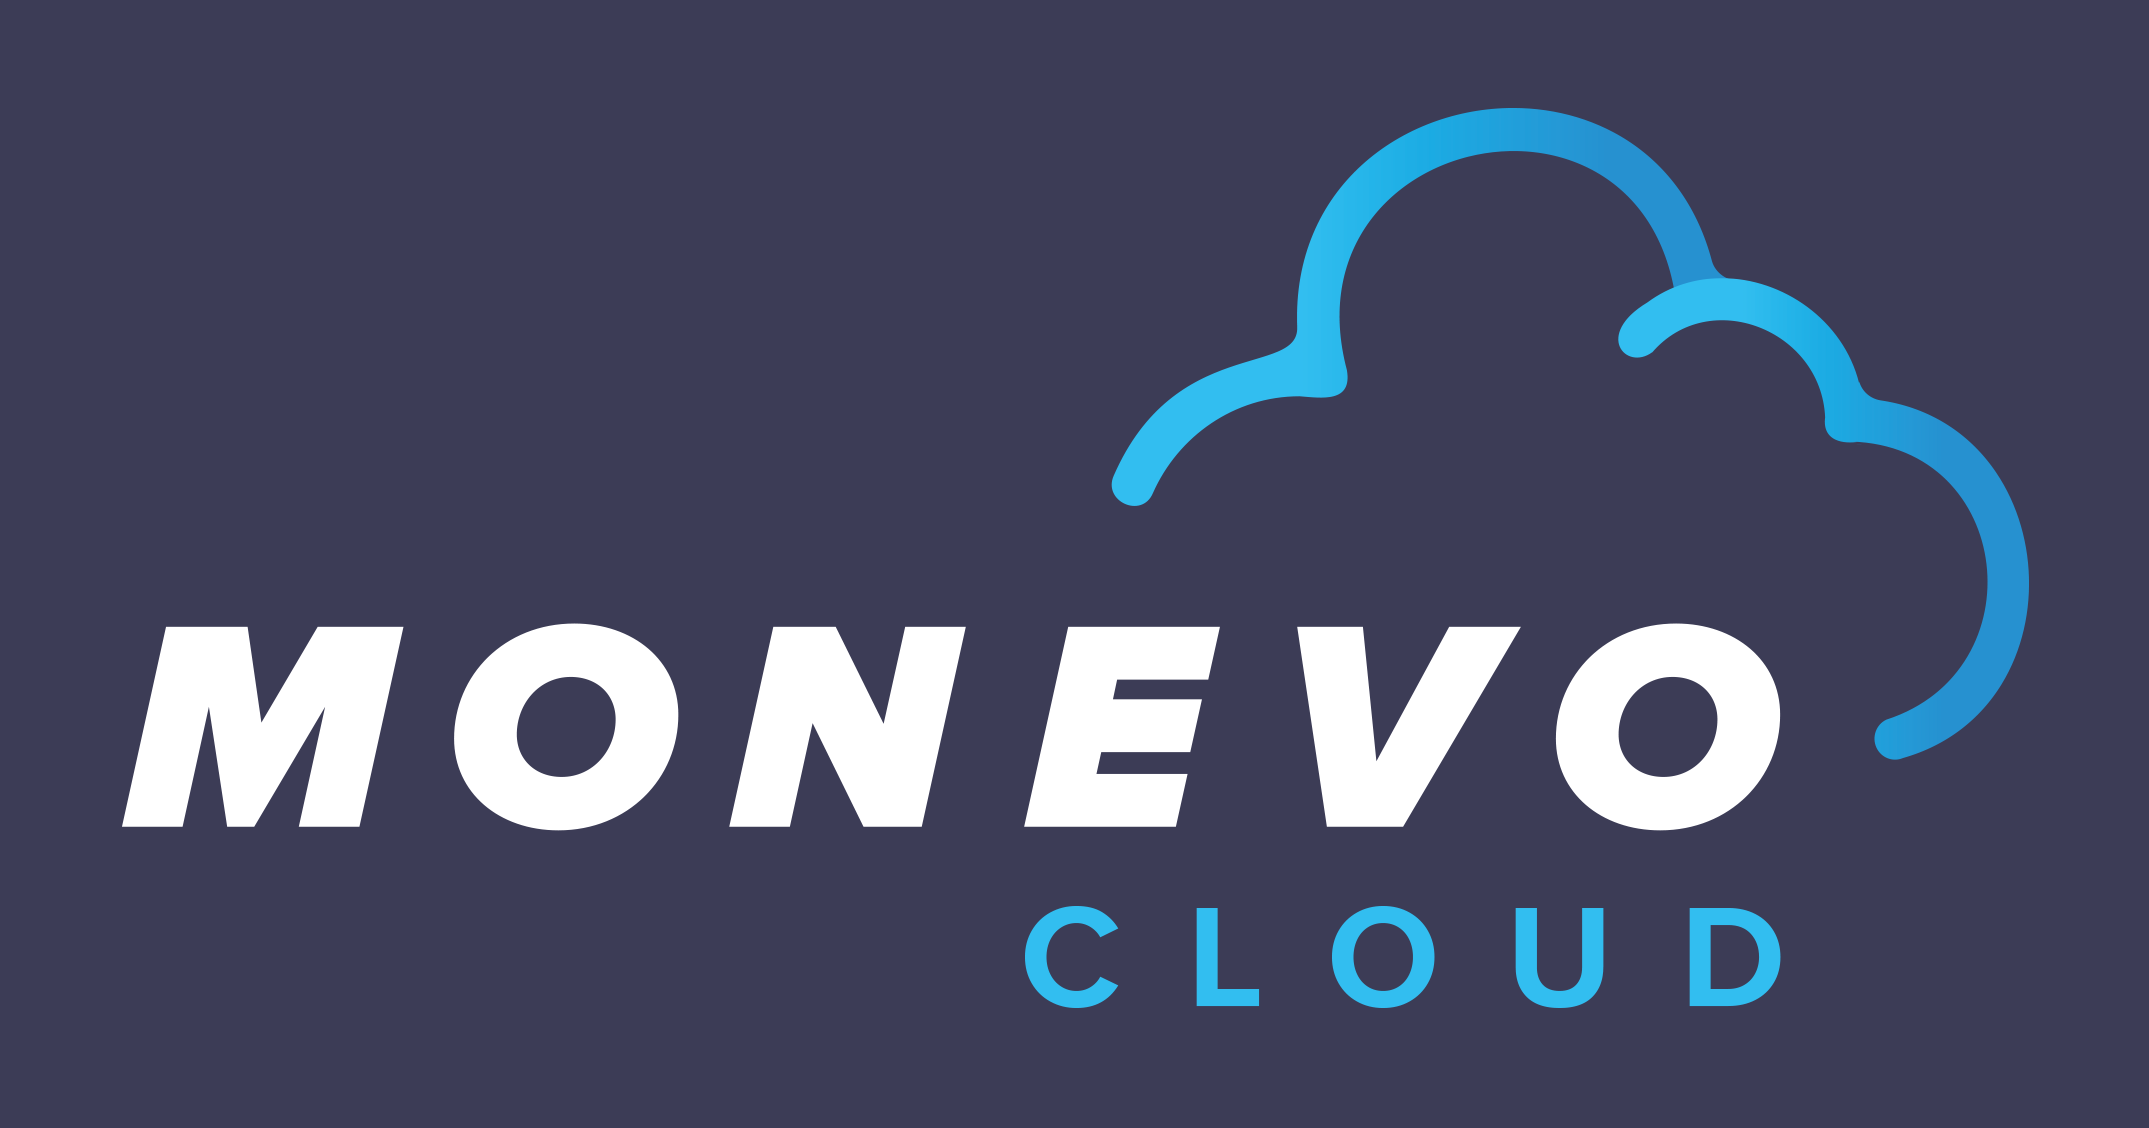 Work in progress: Monevo Provider Cloud logo with blue gradient, white letters